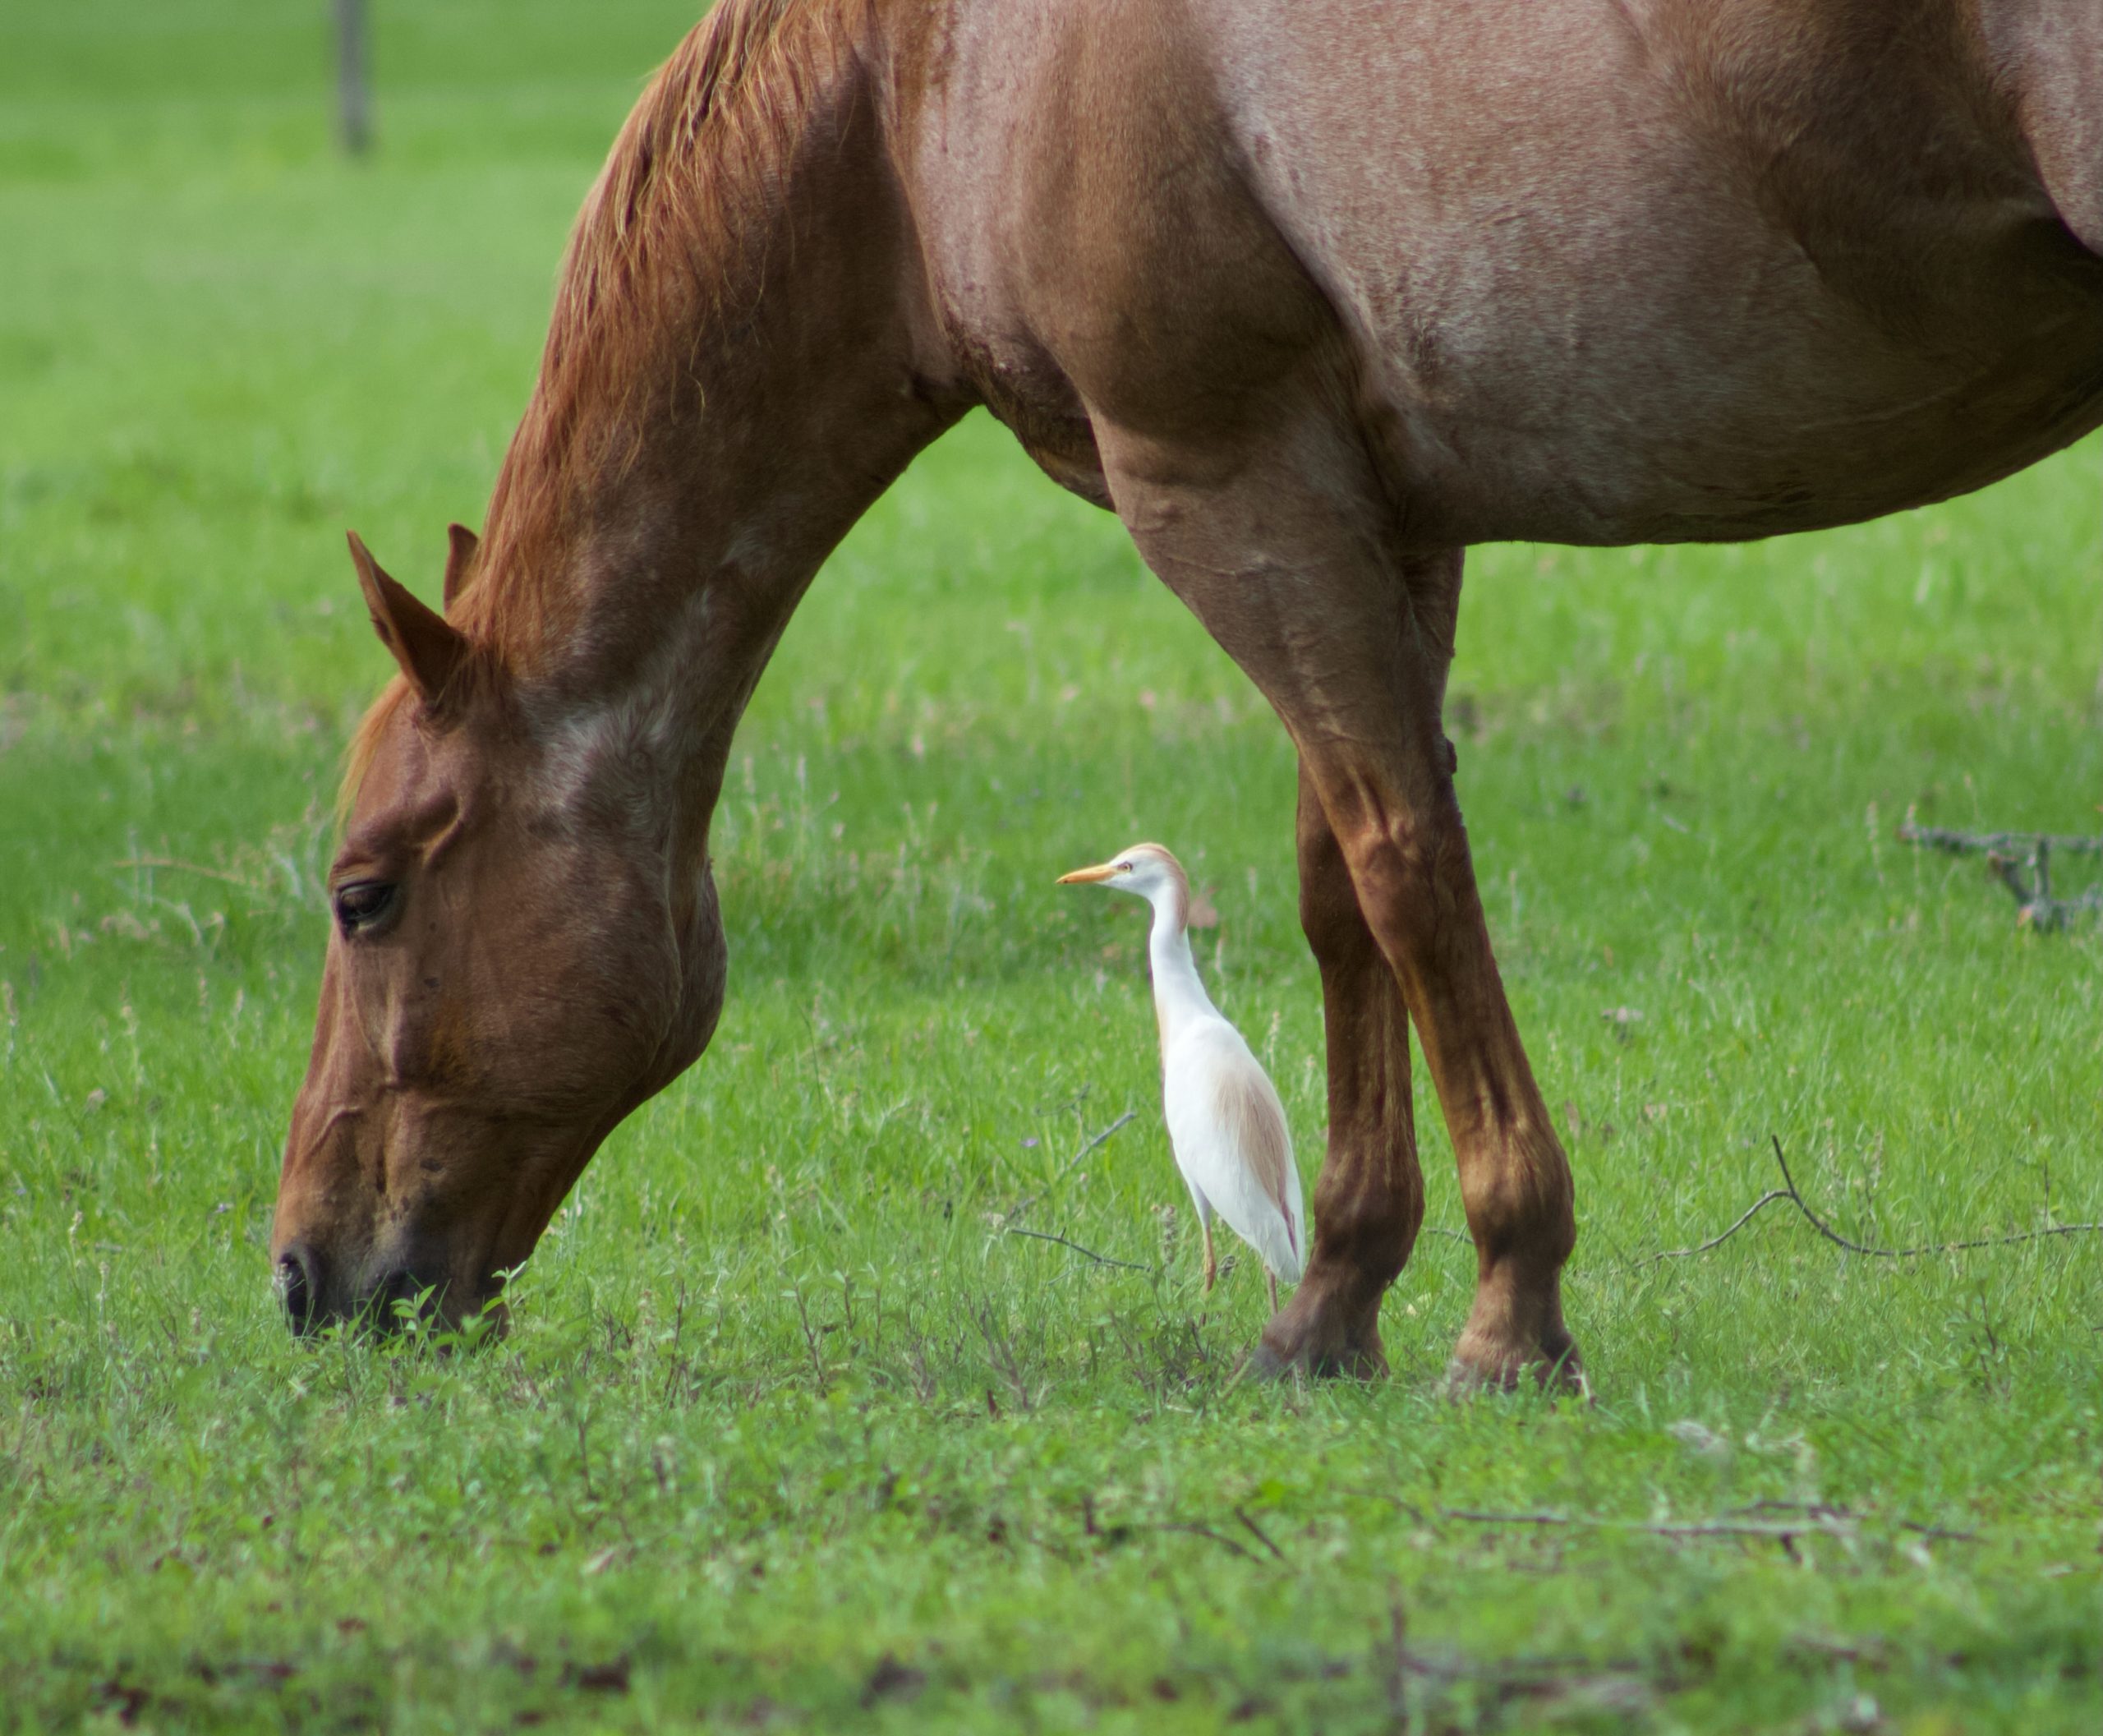 A horse grazing in a field with a cattle egret waiting for insects to be disturbed.